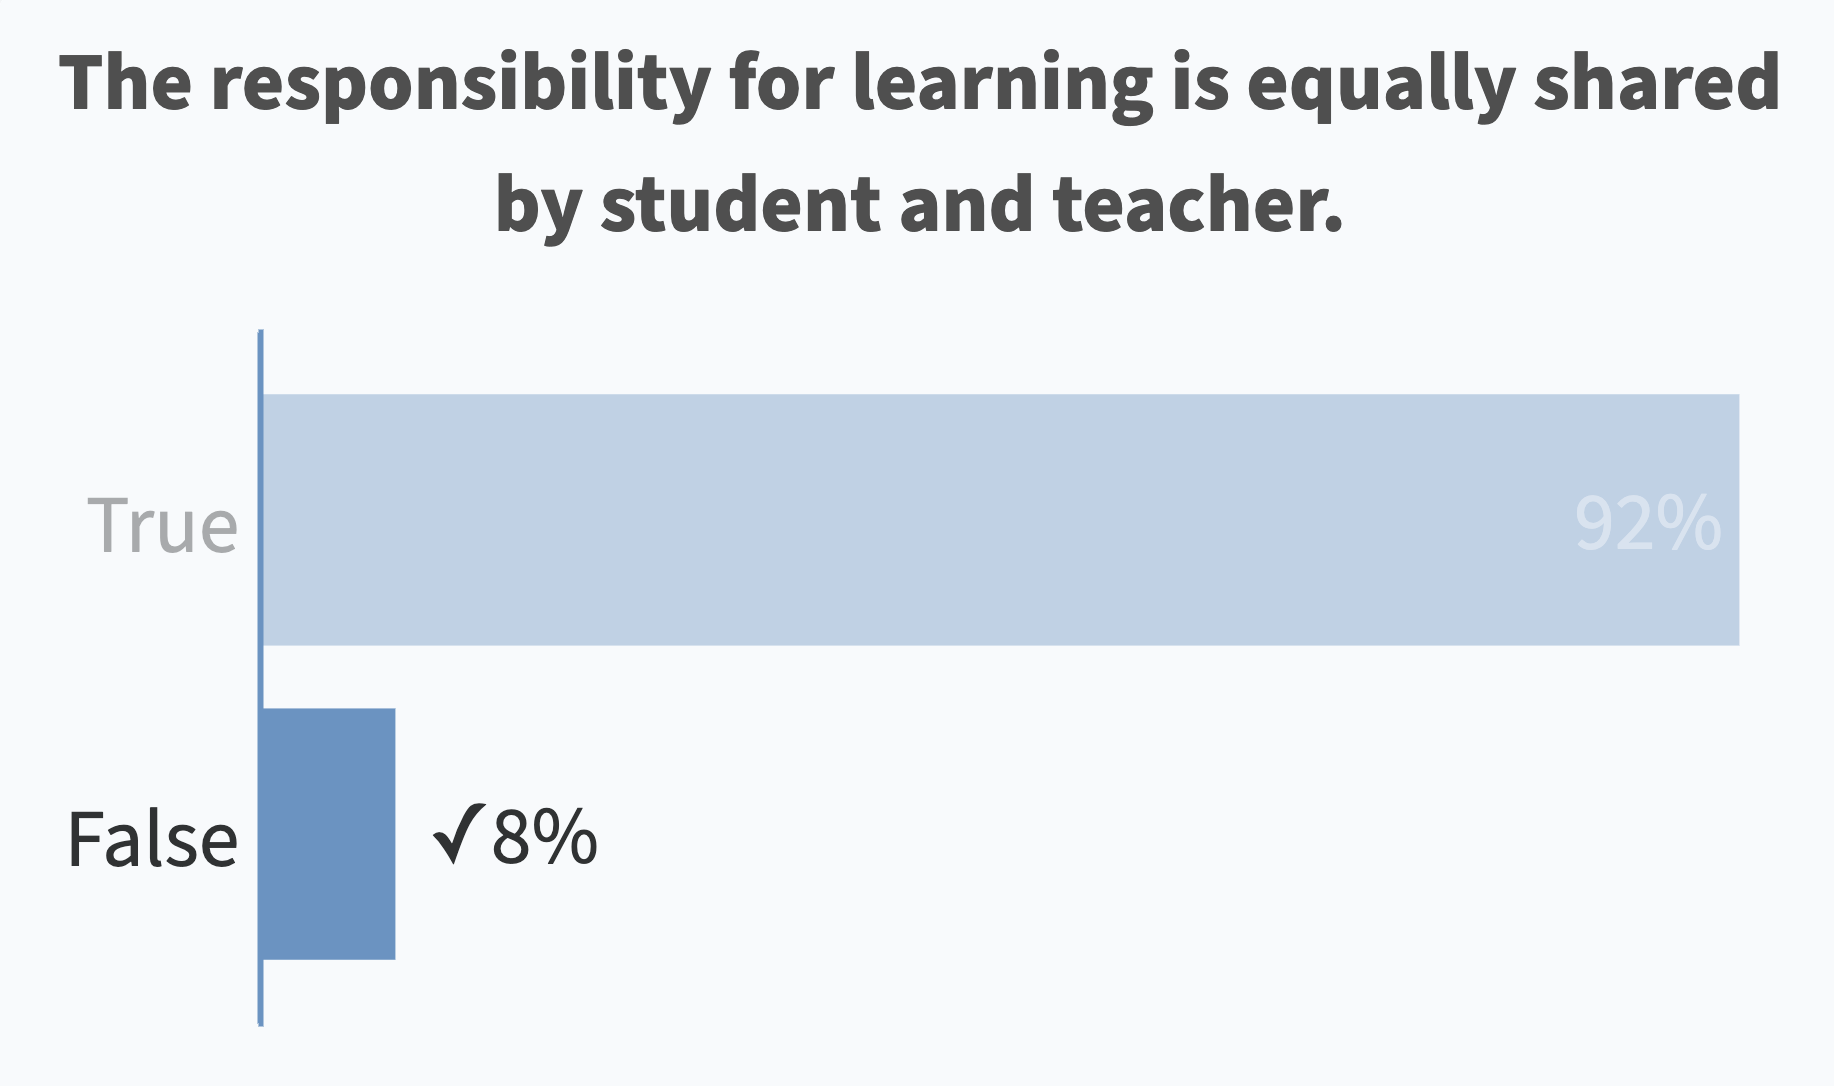 The responsibility for learning is equally shared by student and teacher. (False: 8% correct)